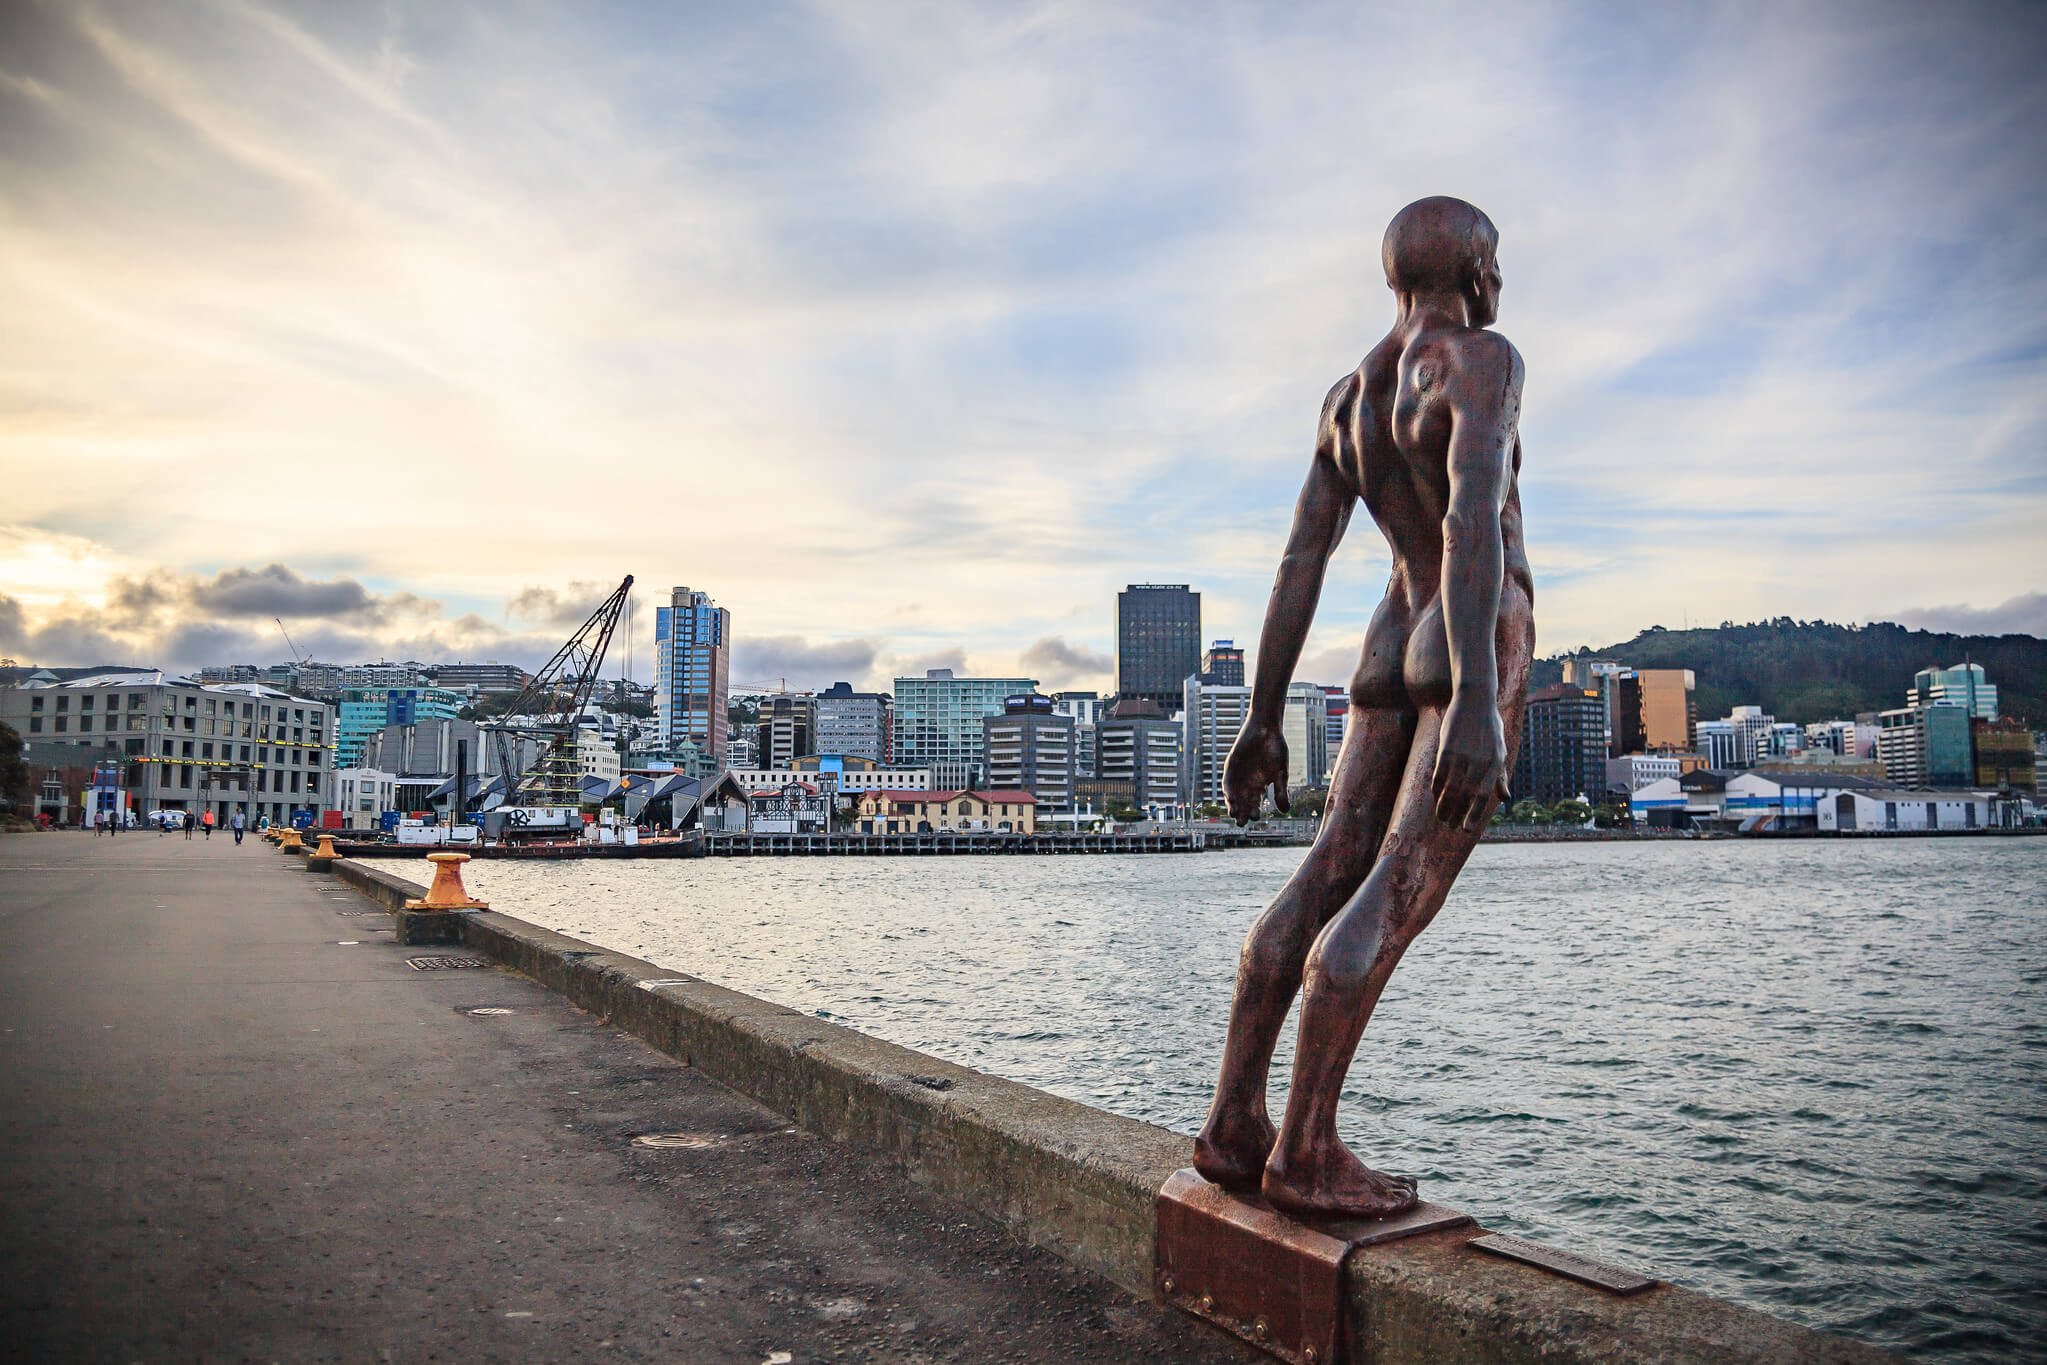 The famous sculpture on at the harbour